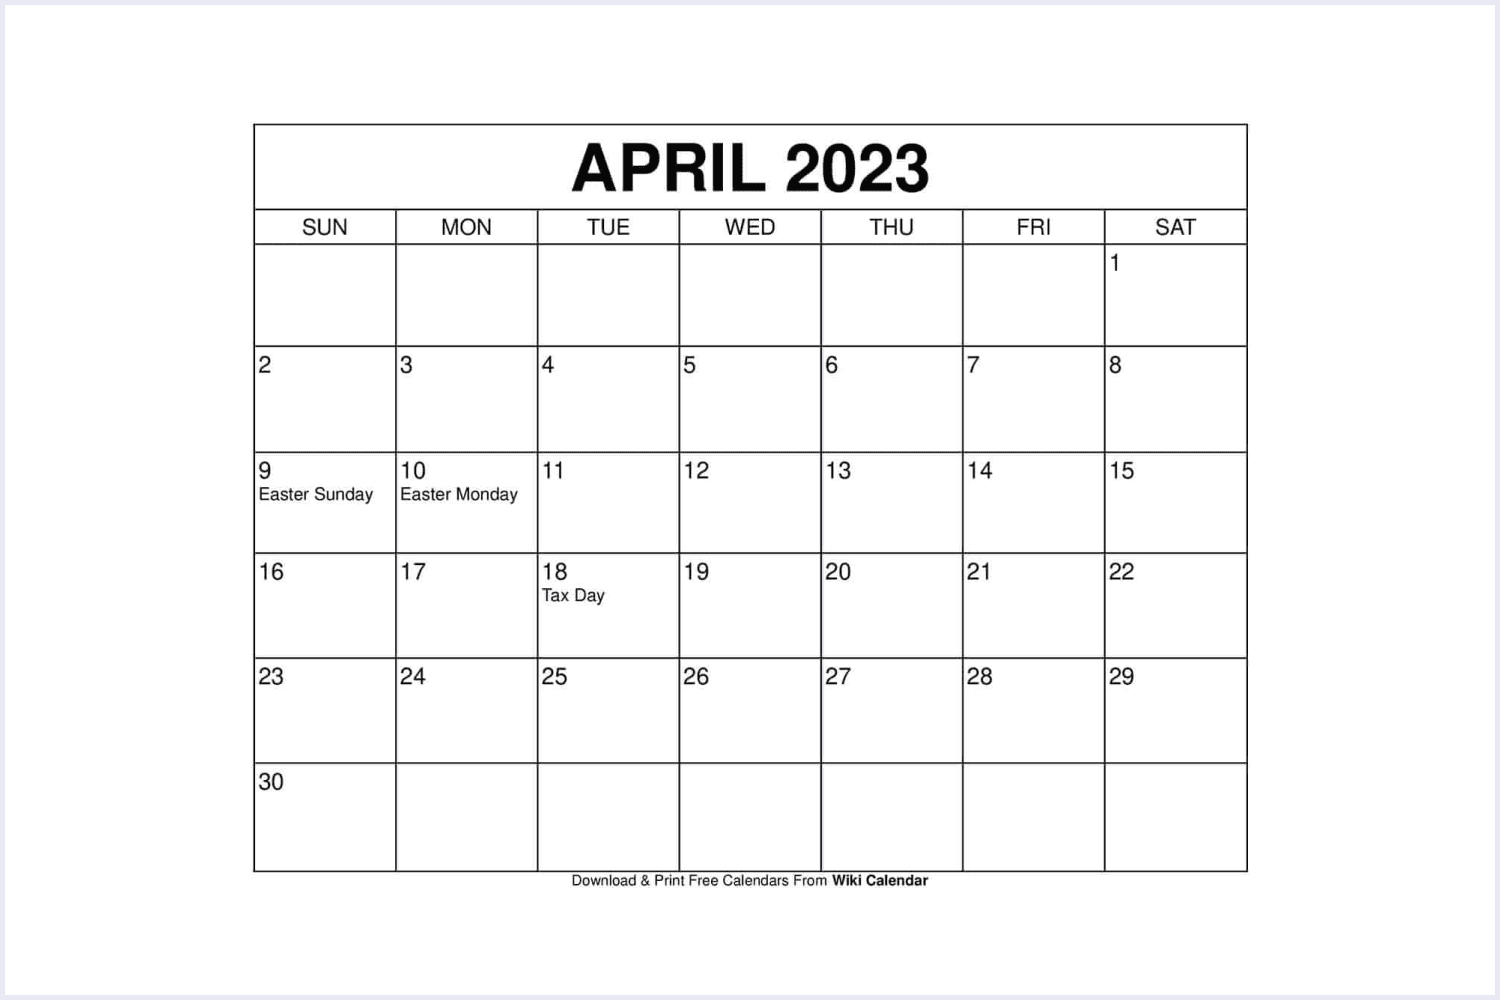 Calendar for April 2023 in a minimalist style.